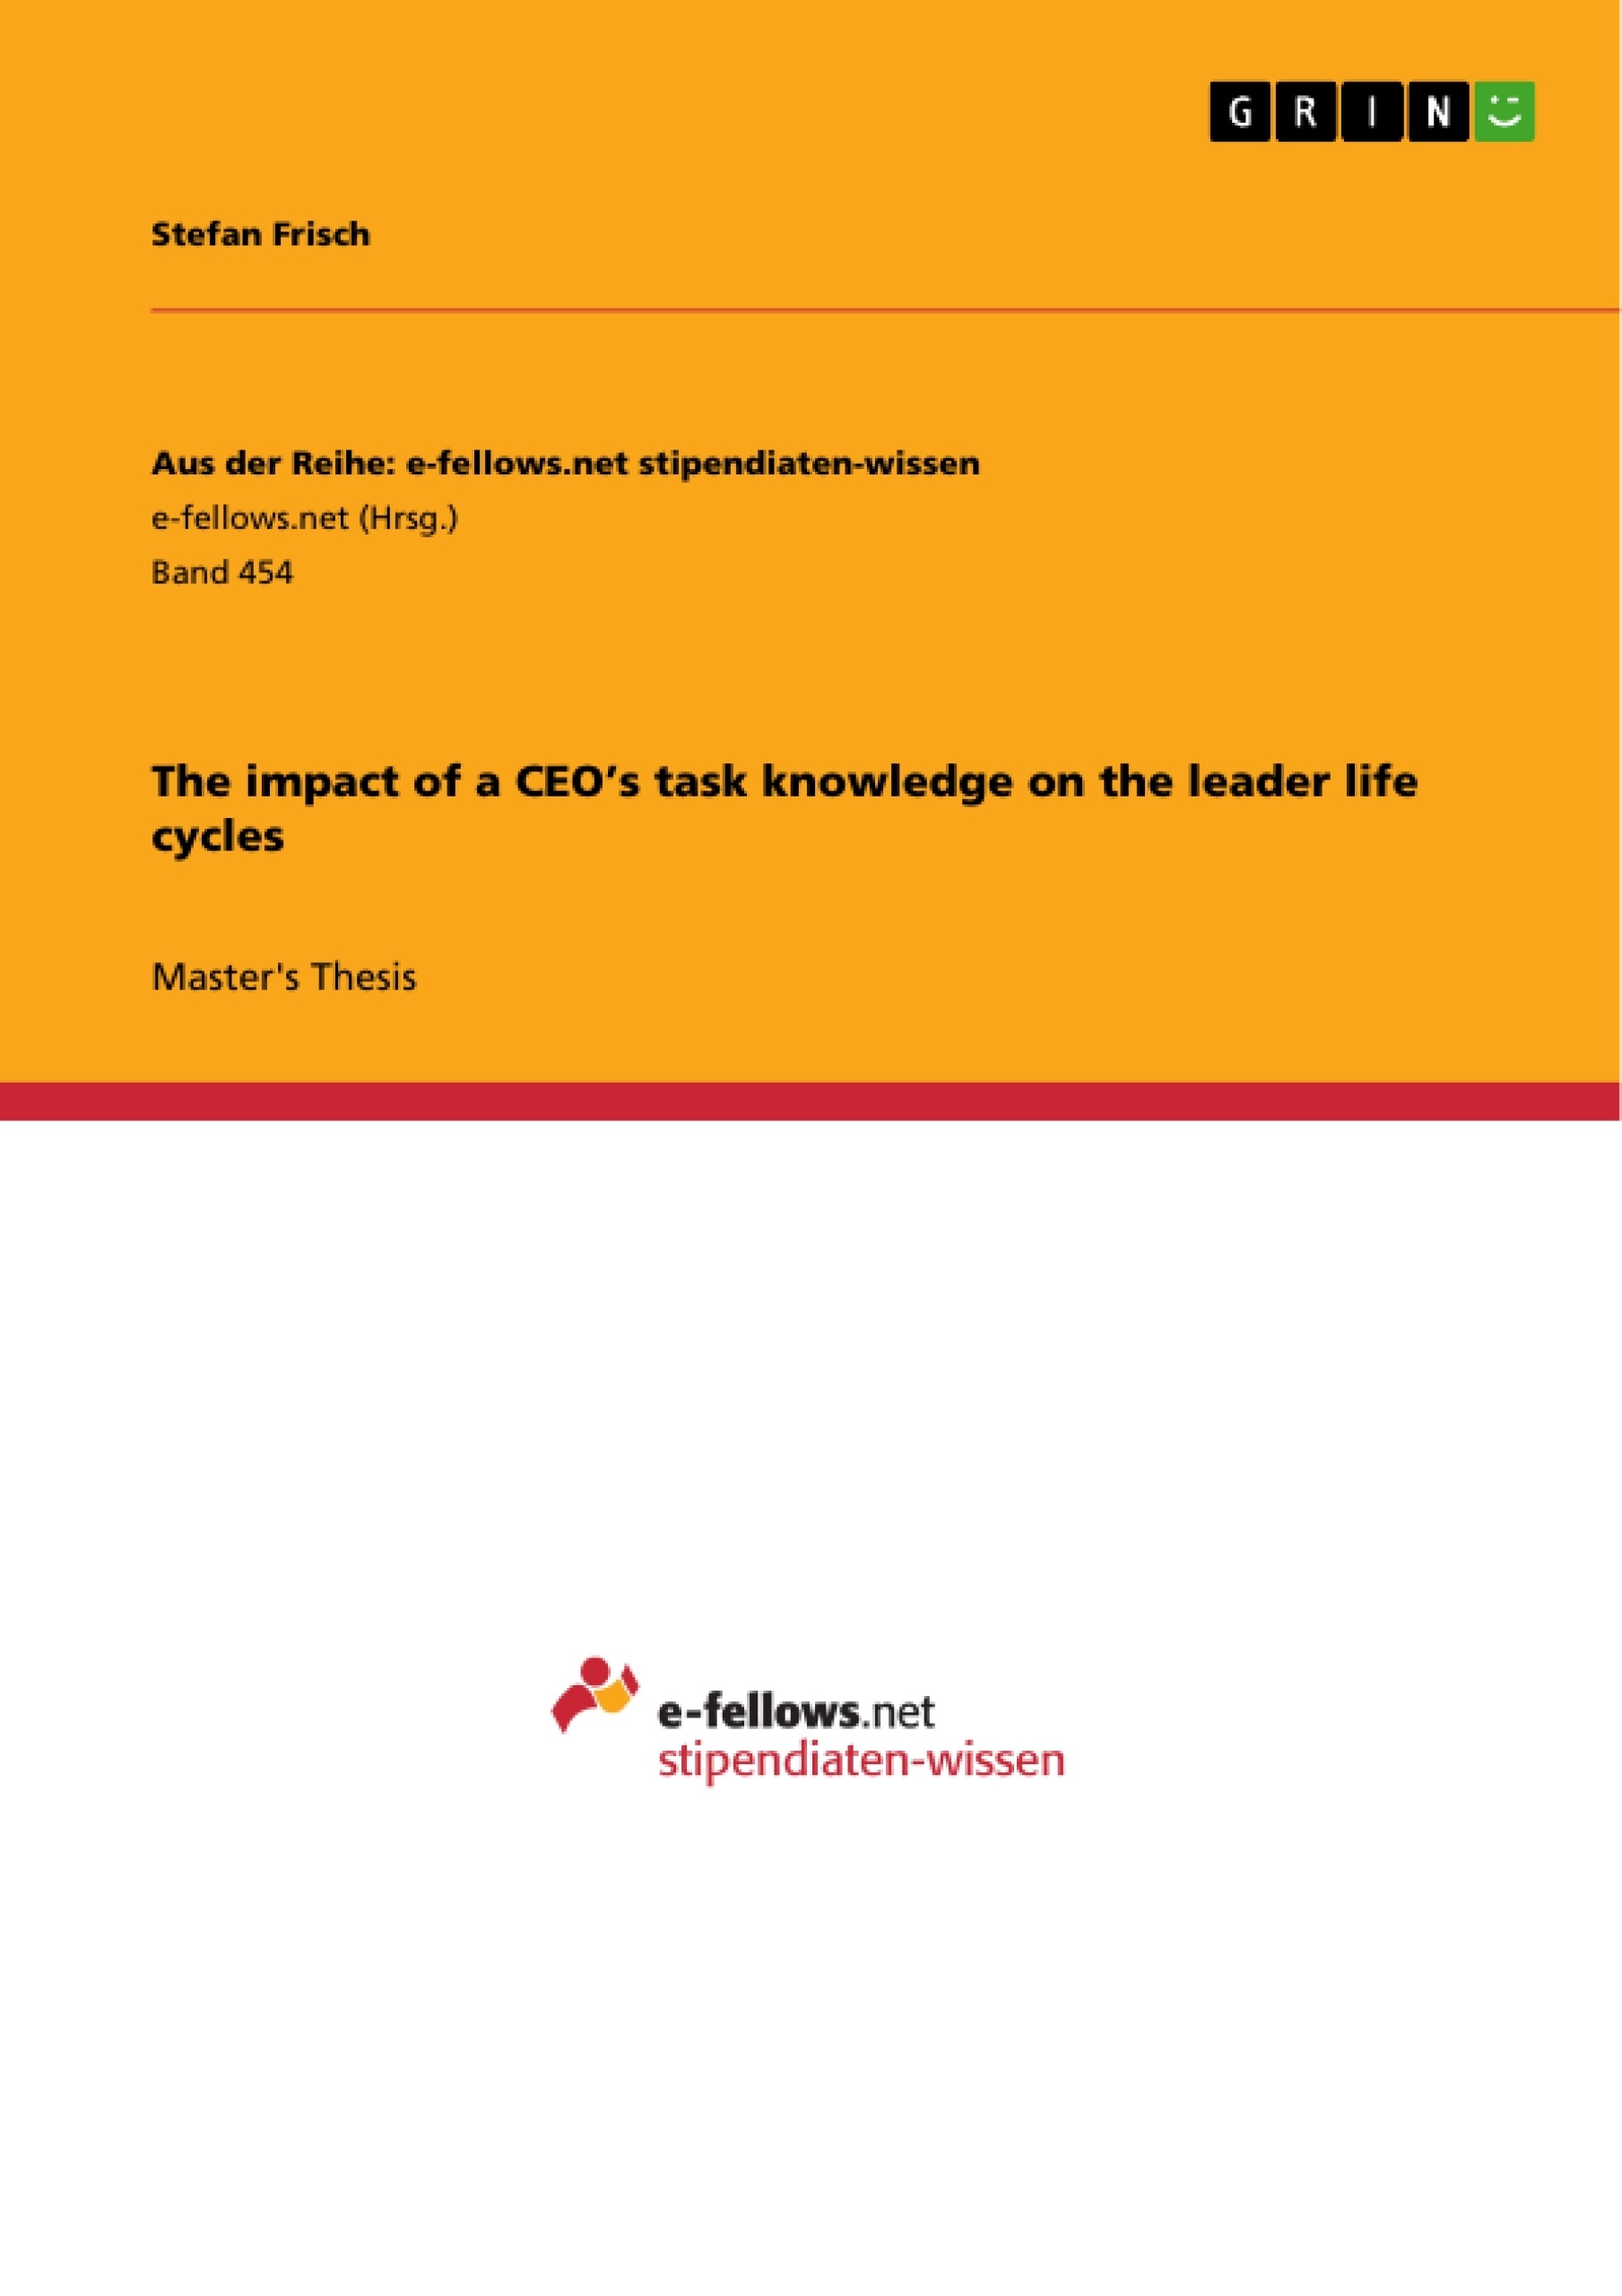 Title: The impact of a CEO’s task knowledge on the leader life cycles